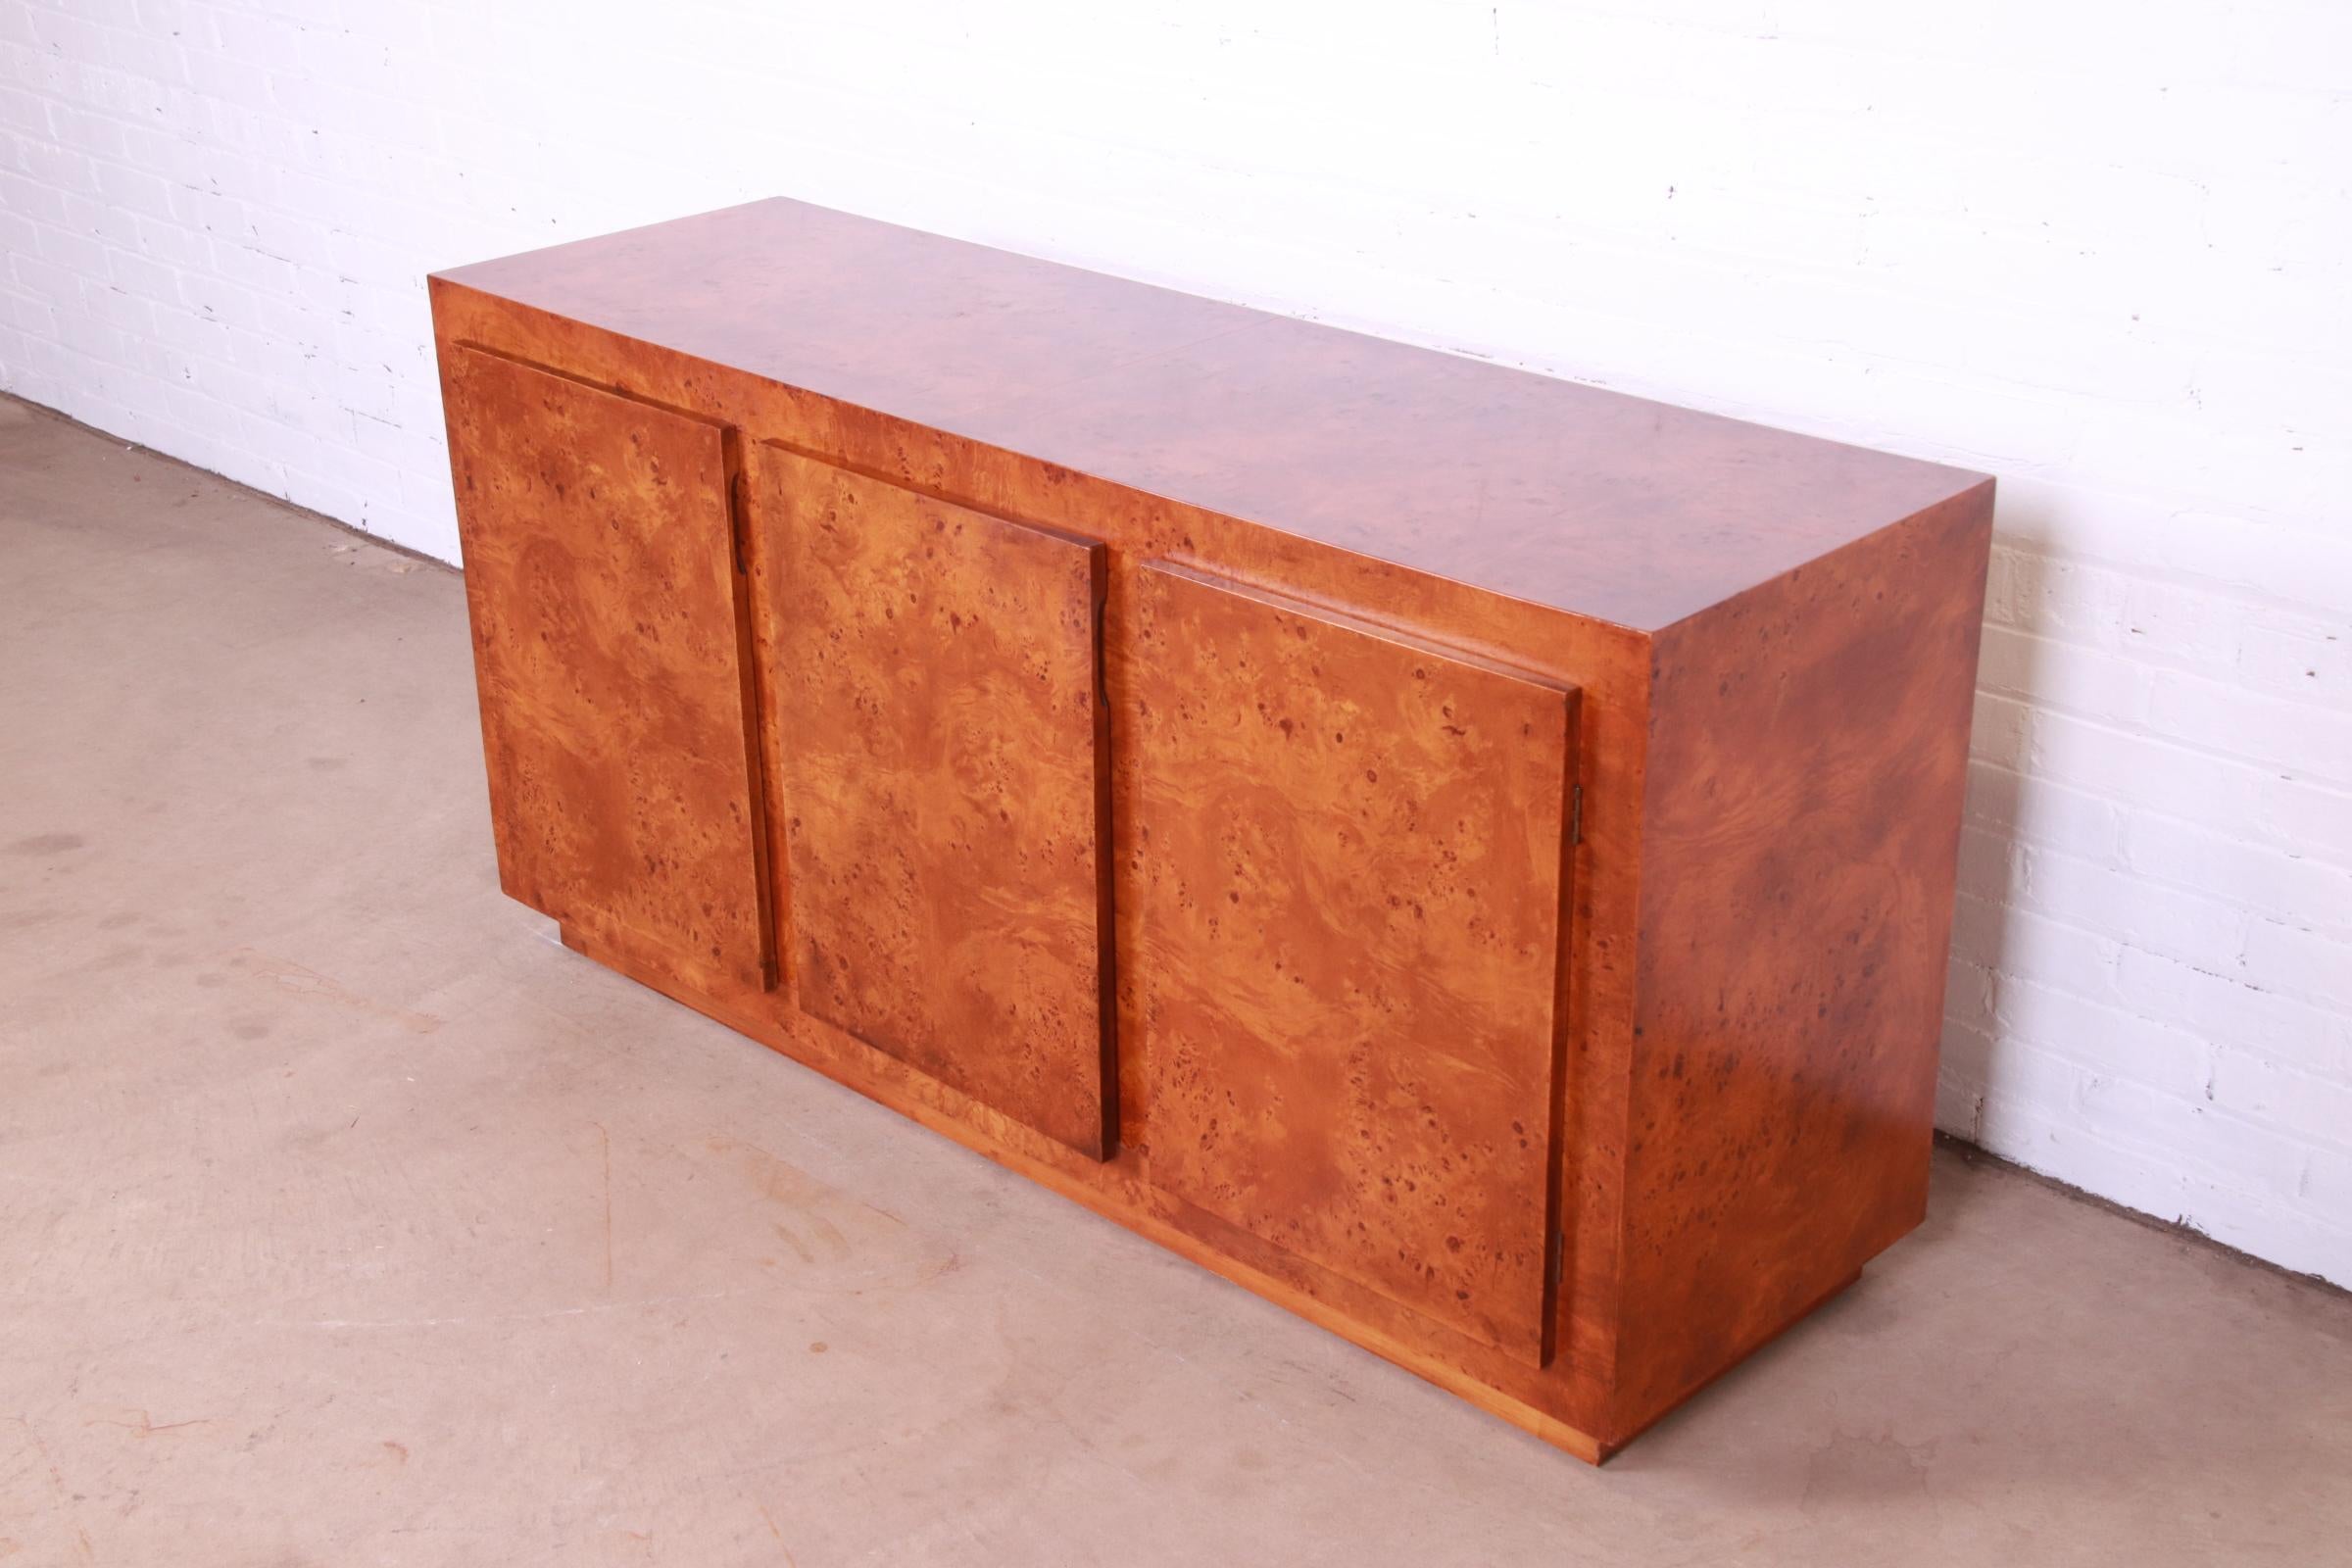 Milo Baughman Style Burled Olive Wood Sideboard, Credenza, or Bar Cabinet In Good Condition For Sale In South Bend, IN